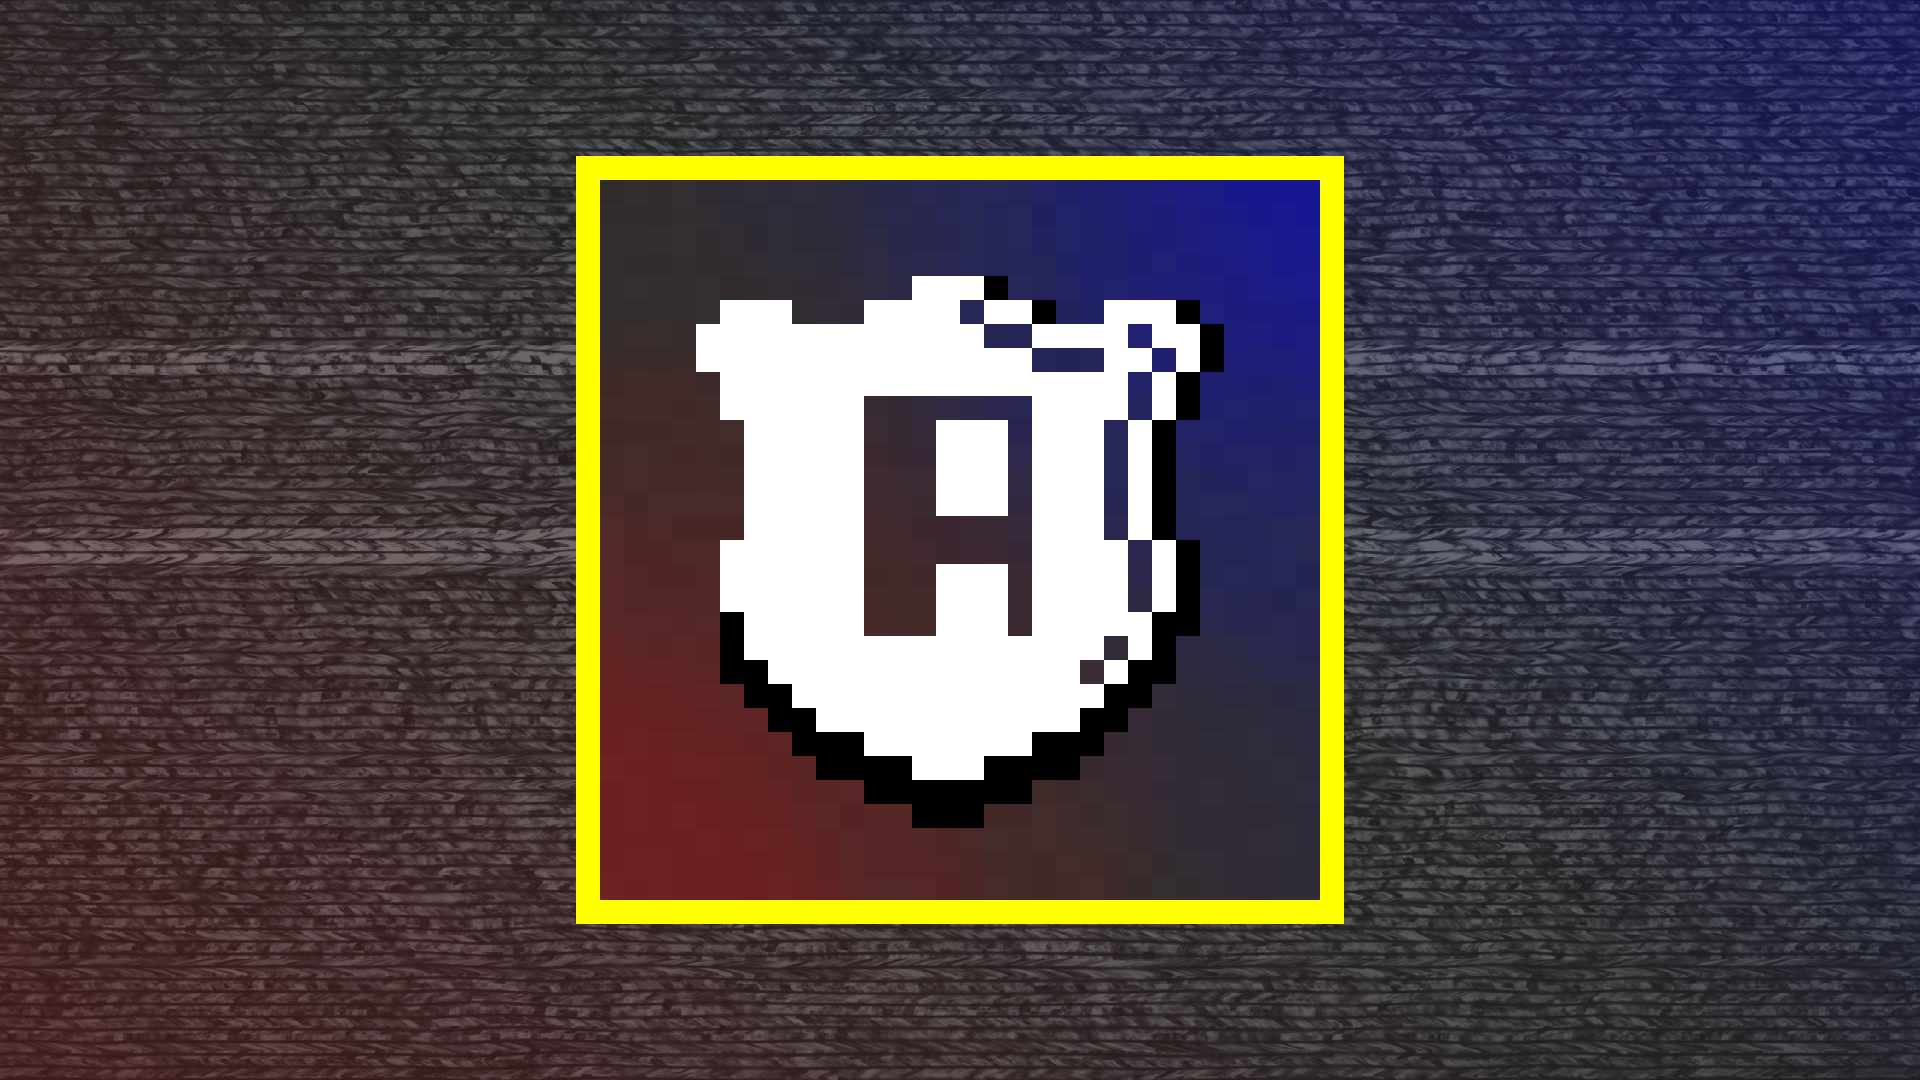 Icon for Professional